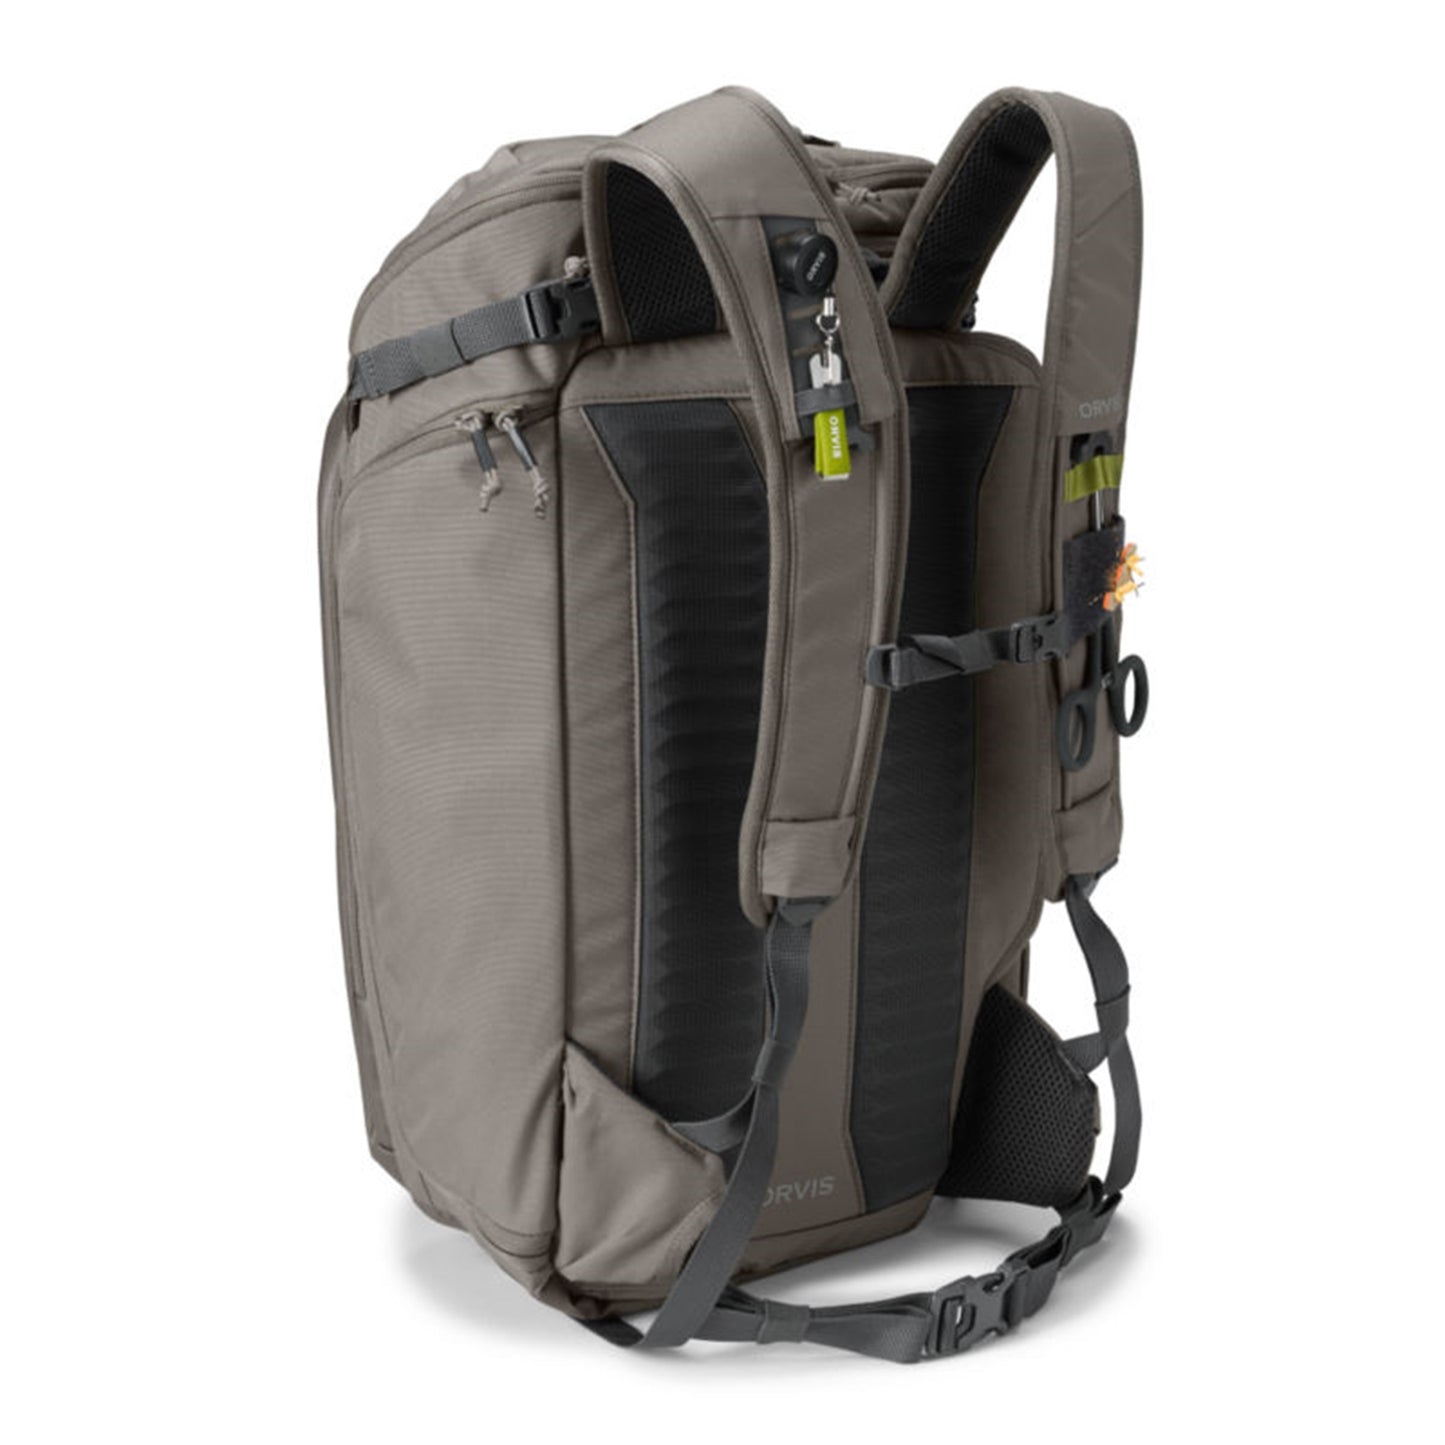 ORVIS Bug-Out Backpack